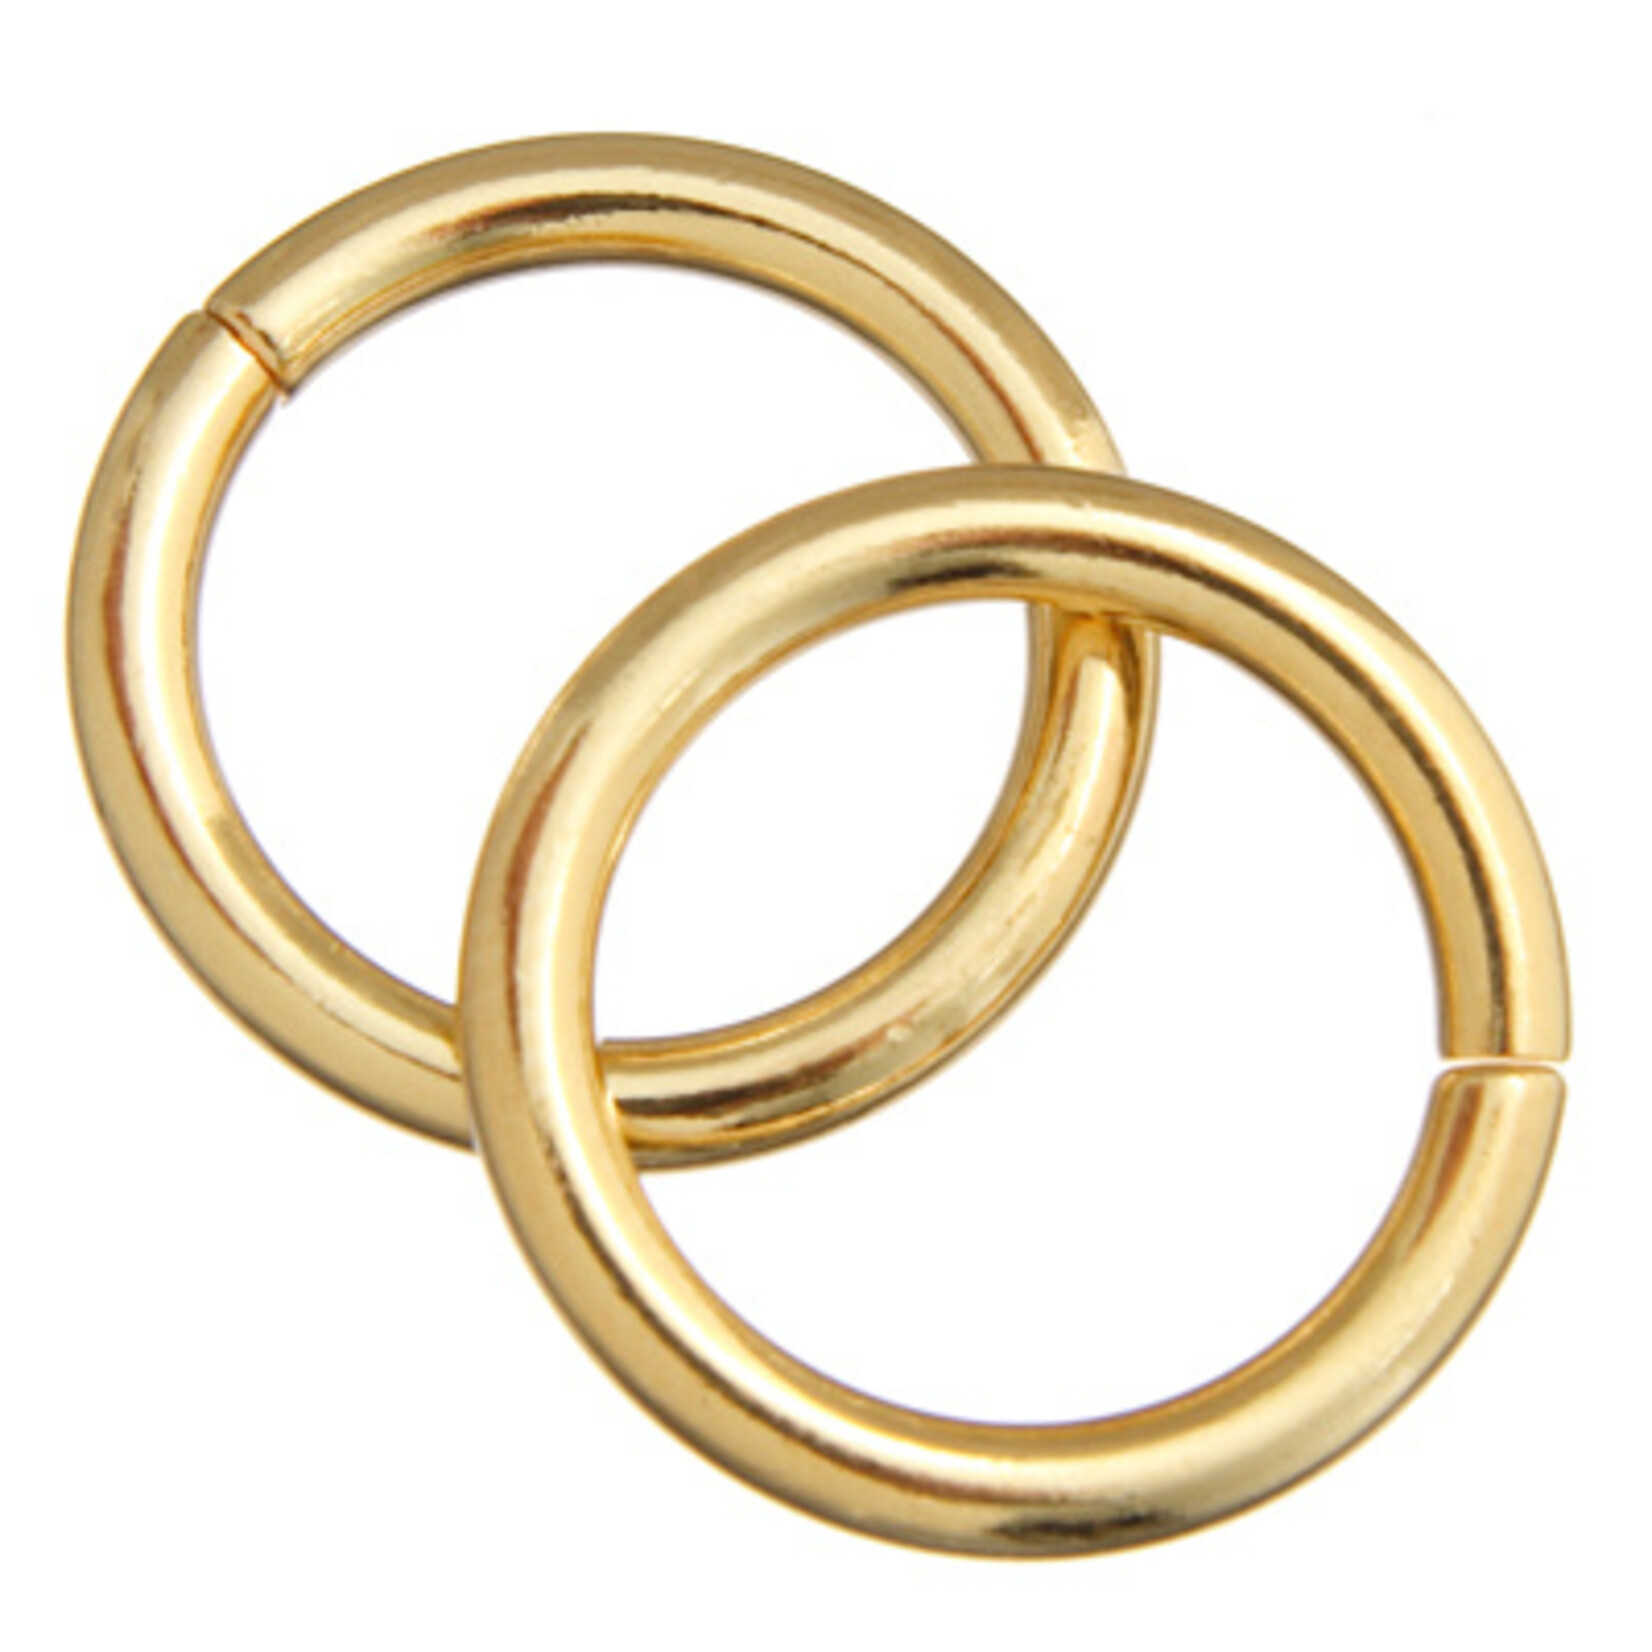 Jump Ring 20mm - Thick 2.6mm Gold (25pcs)